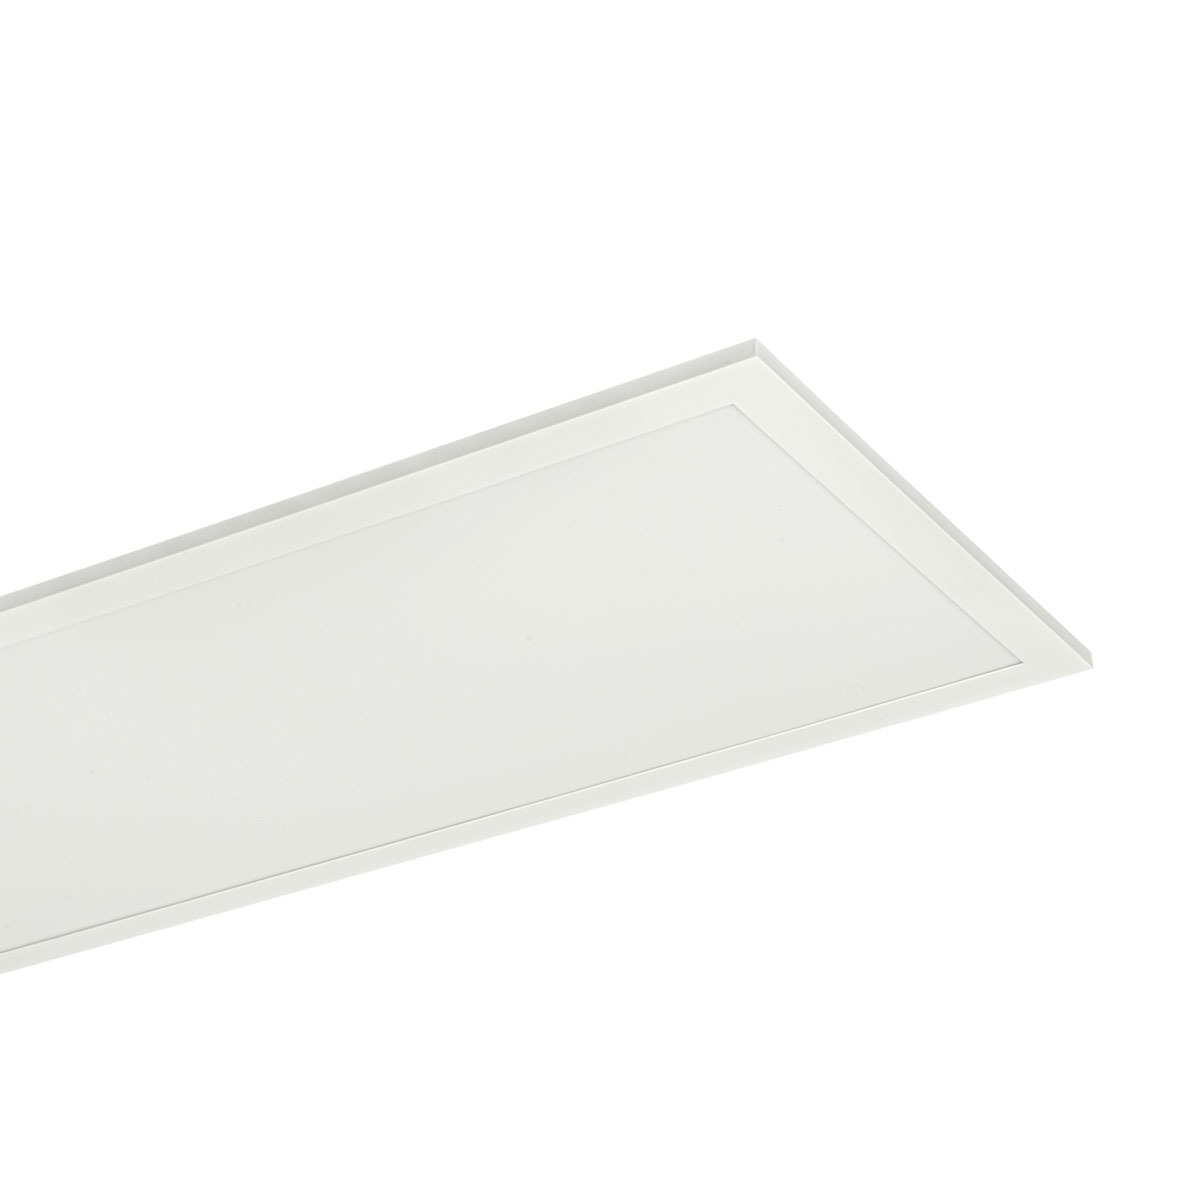 ECO PANEL G2 RECESSED MODULE 1200X600 50W COLOUR SELECT PHASE-CUT